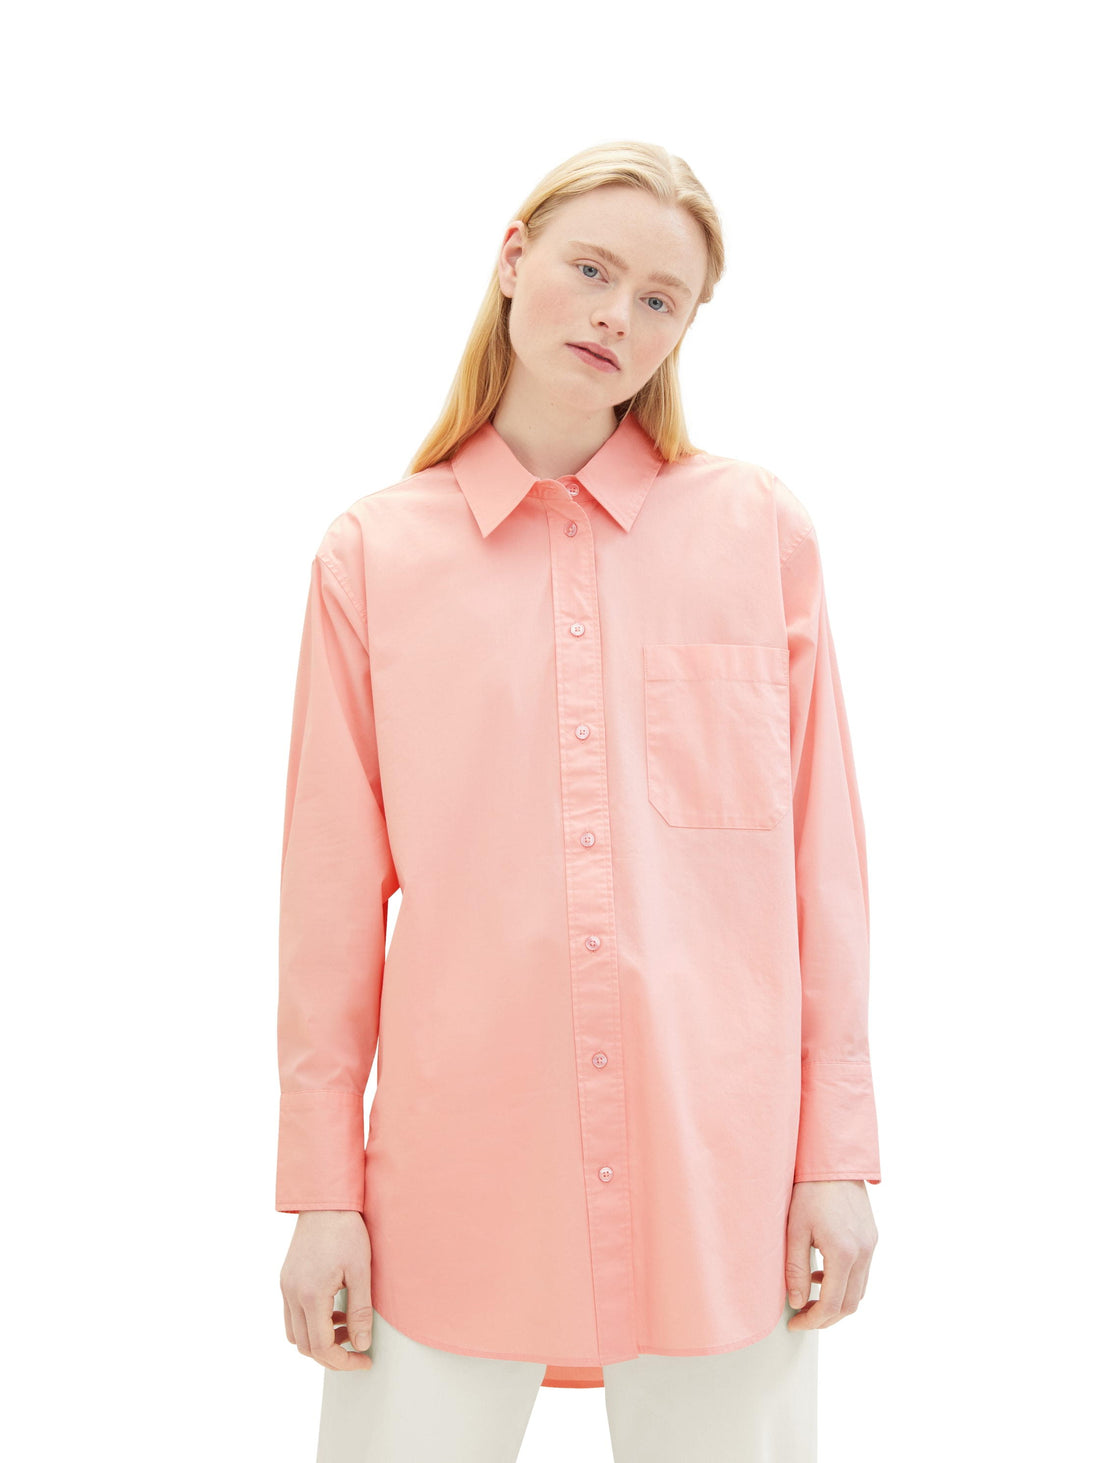 Long Shirt With Chest Pocket_1032792_21171_01